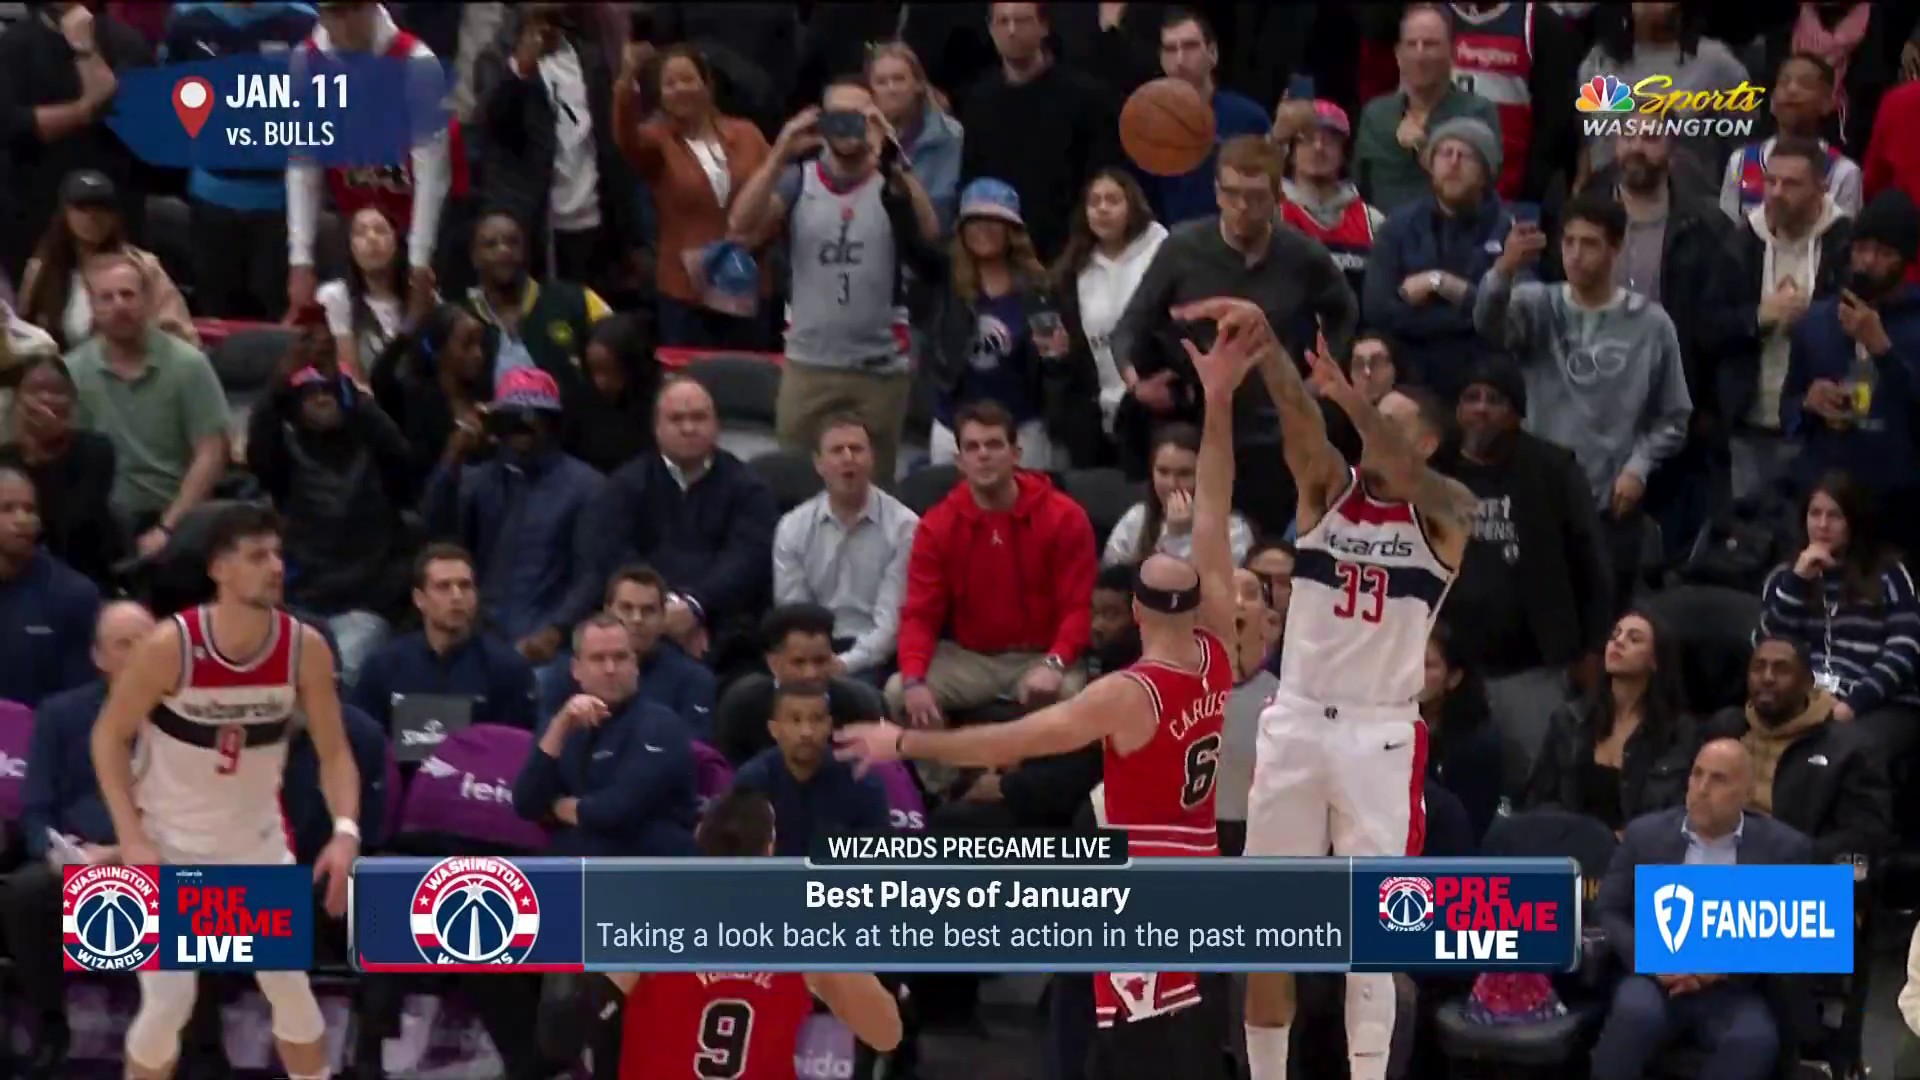 Wizards top plays from January 2023